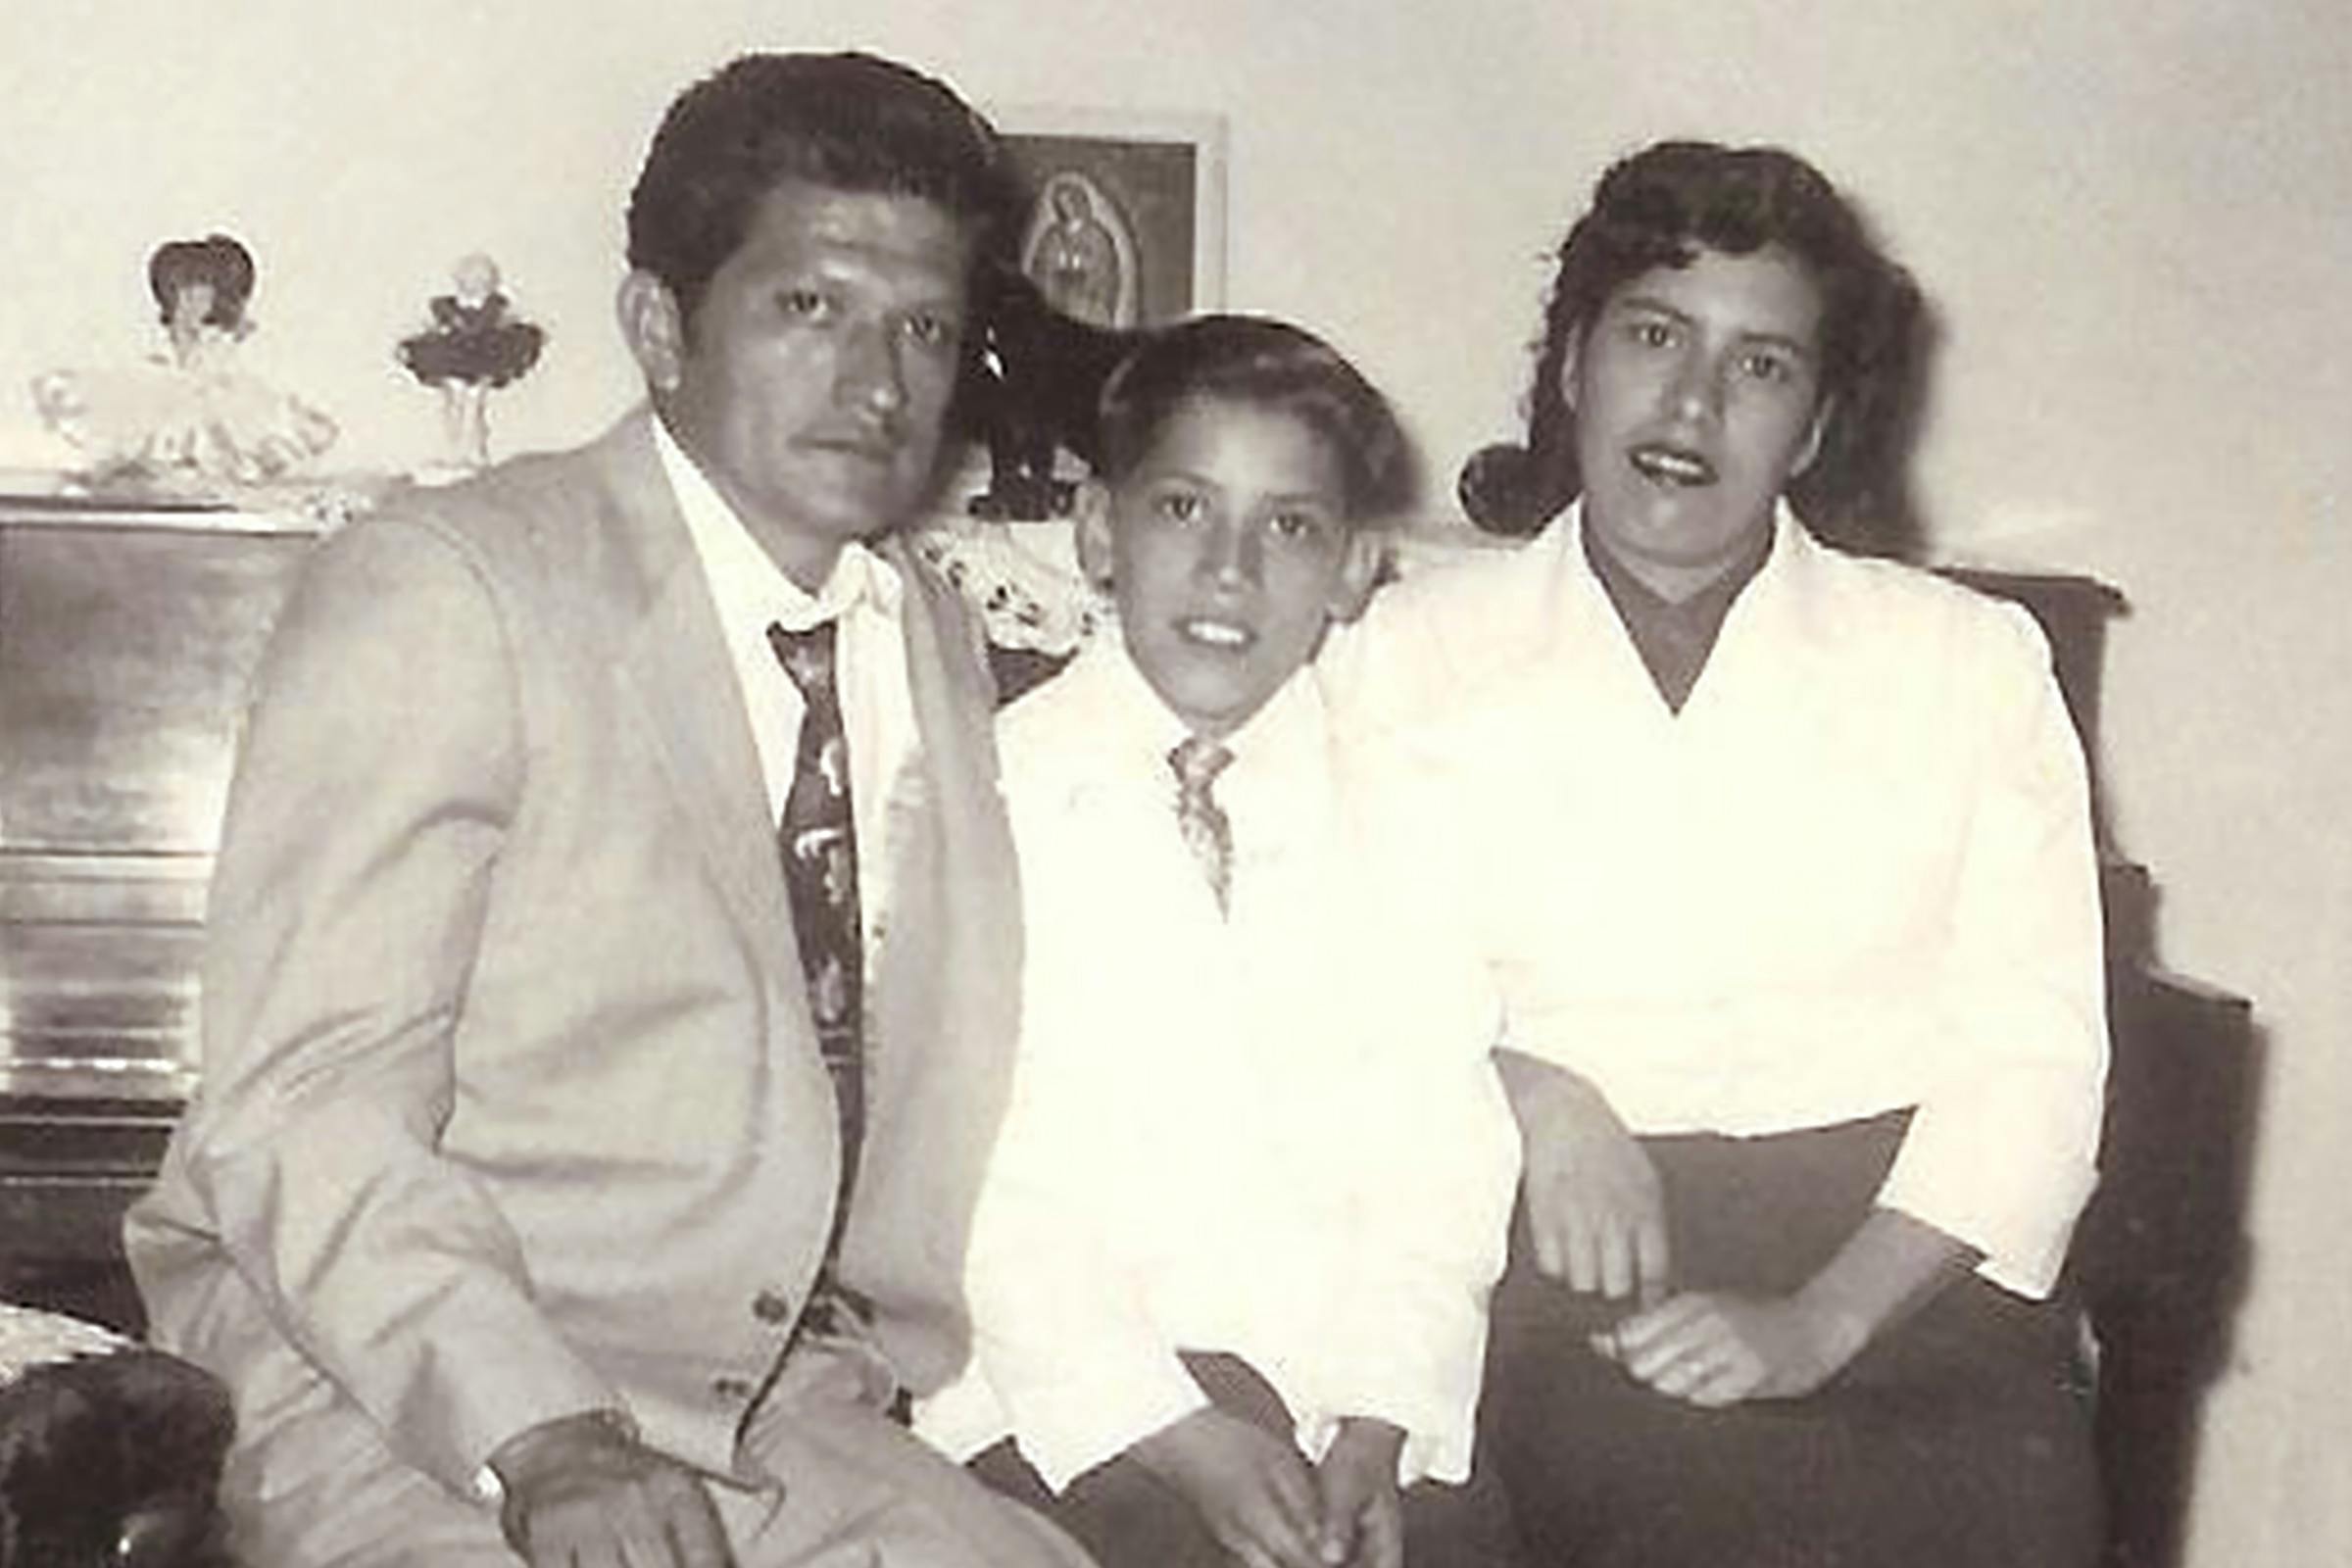 Young Danny Trejo with parents Dionisio and Alice Trejo